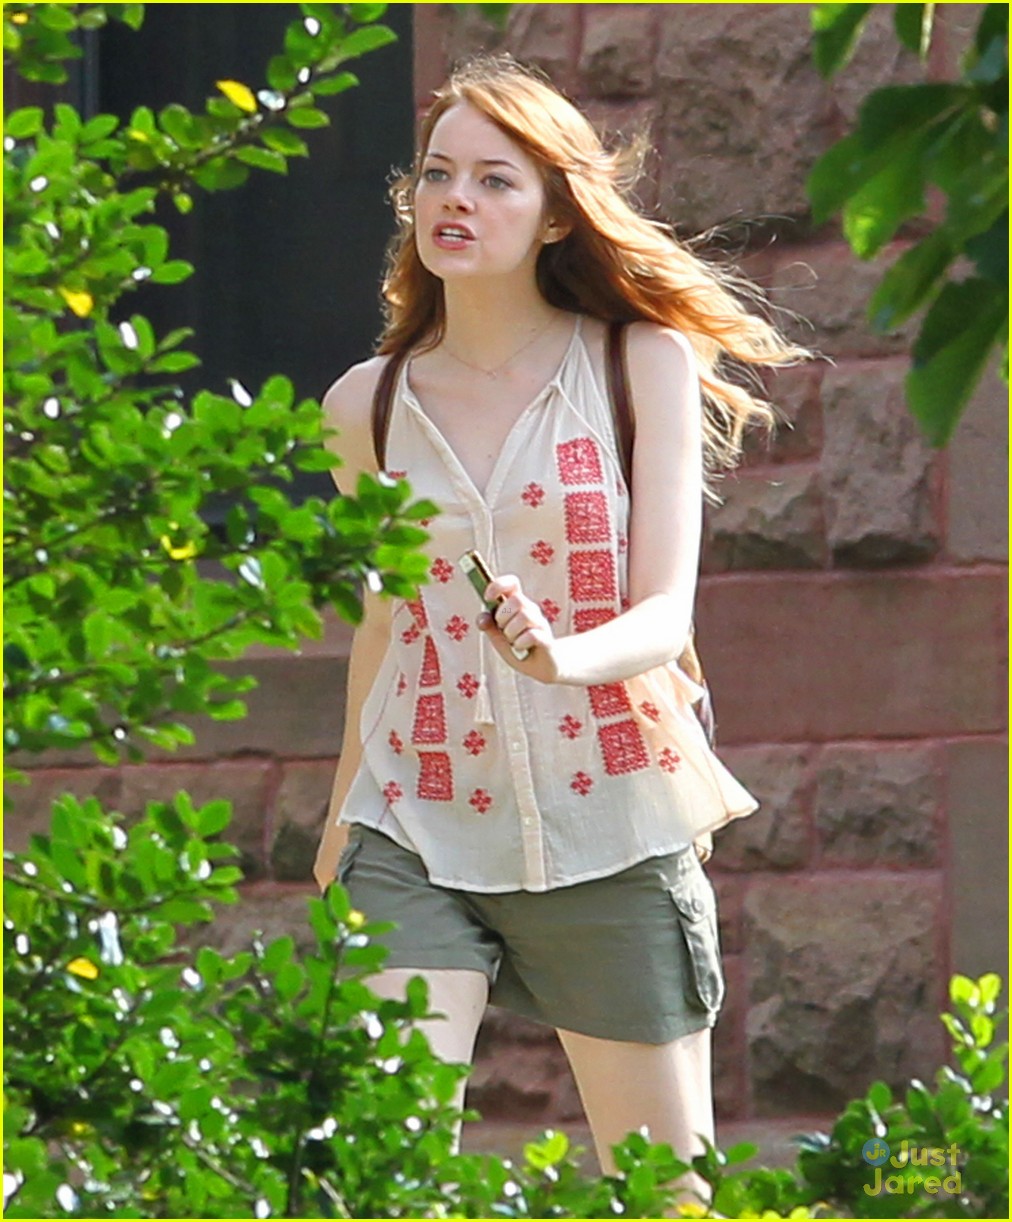 emma stone is having a fit for a scene woody allen film 09